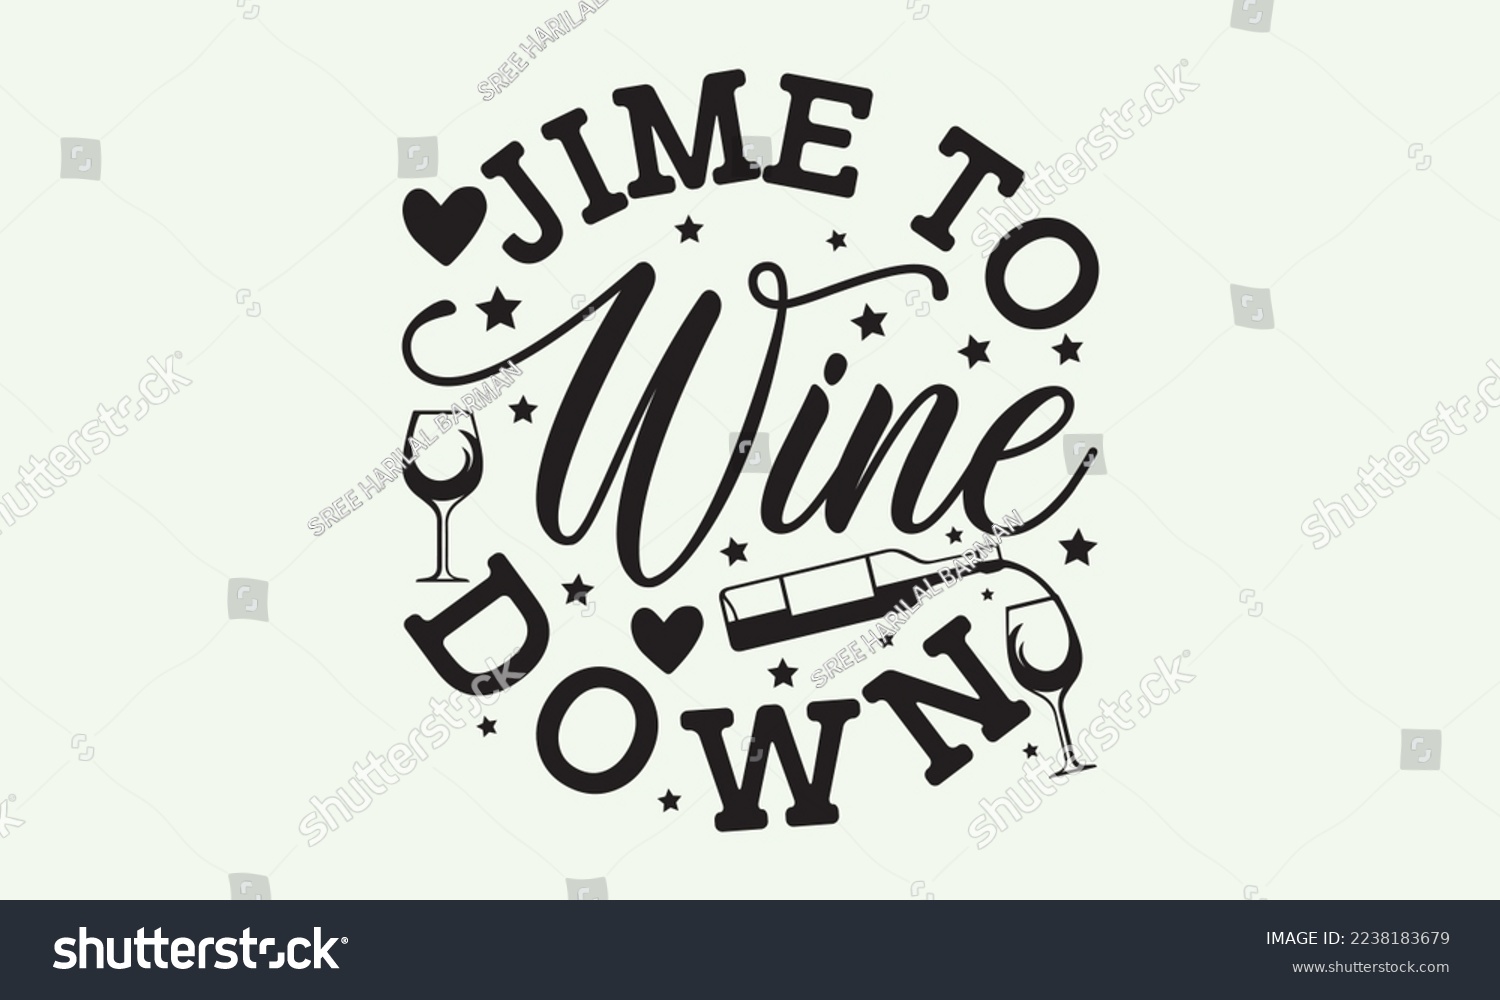 SVG of Jime to wine down - President's day T-shirt Design, File Sports SVG Design, Sports typography t-shirt design, For stickers, Templet, mugs, etc. for Cutting, cards, and flyers. svg